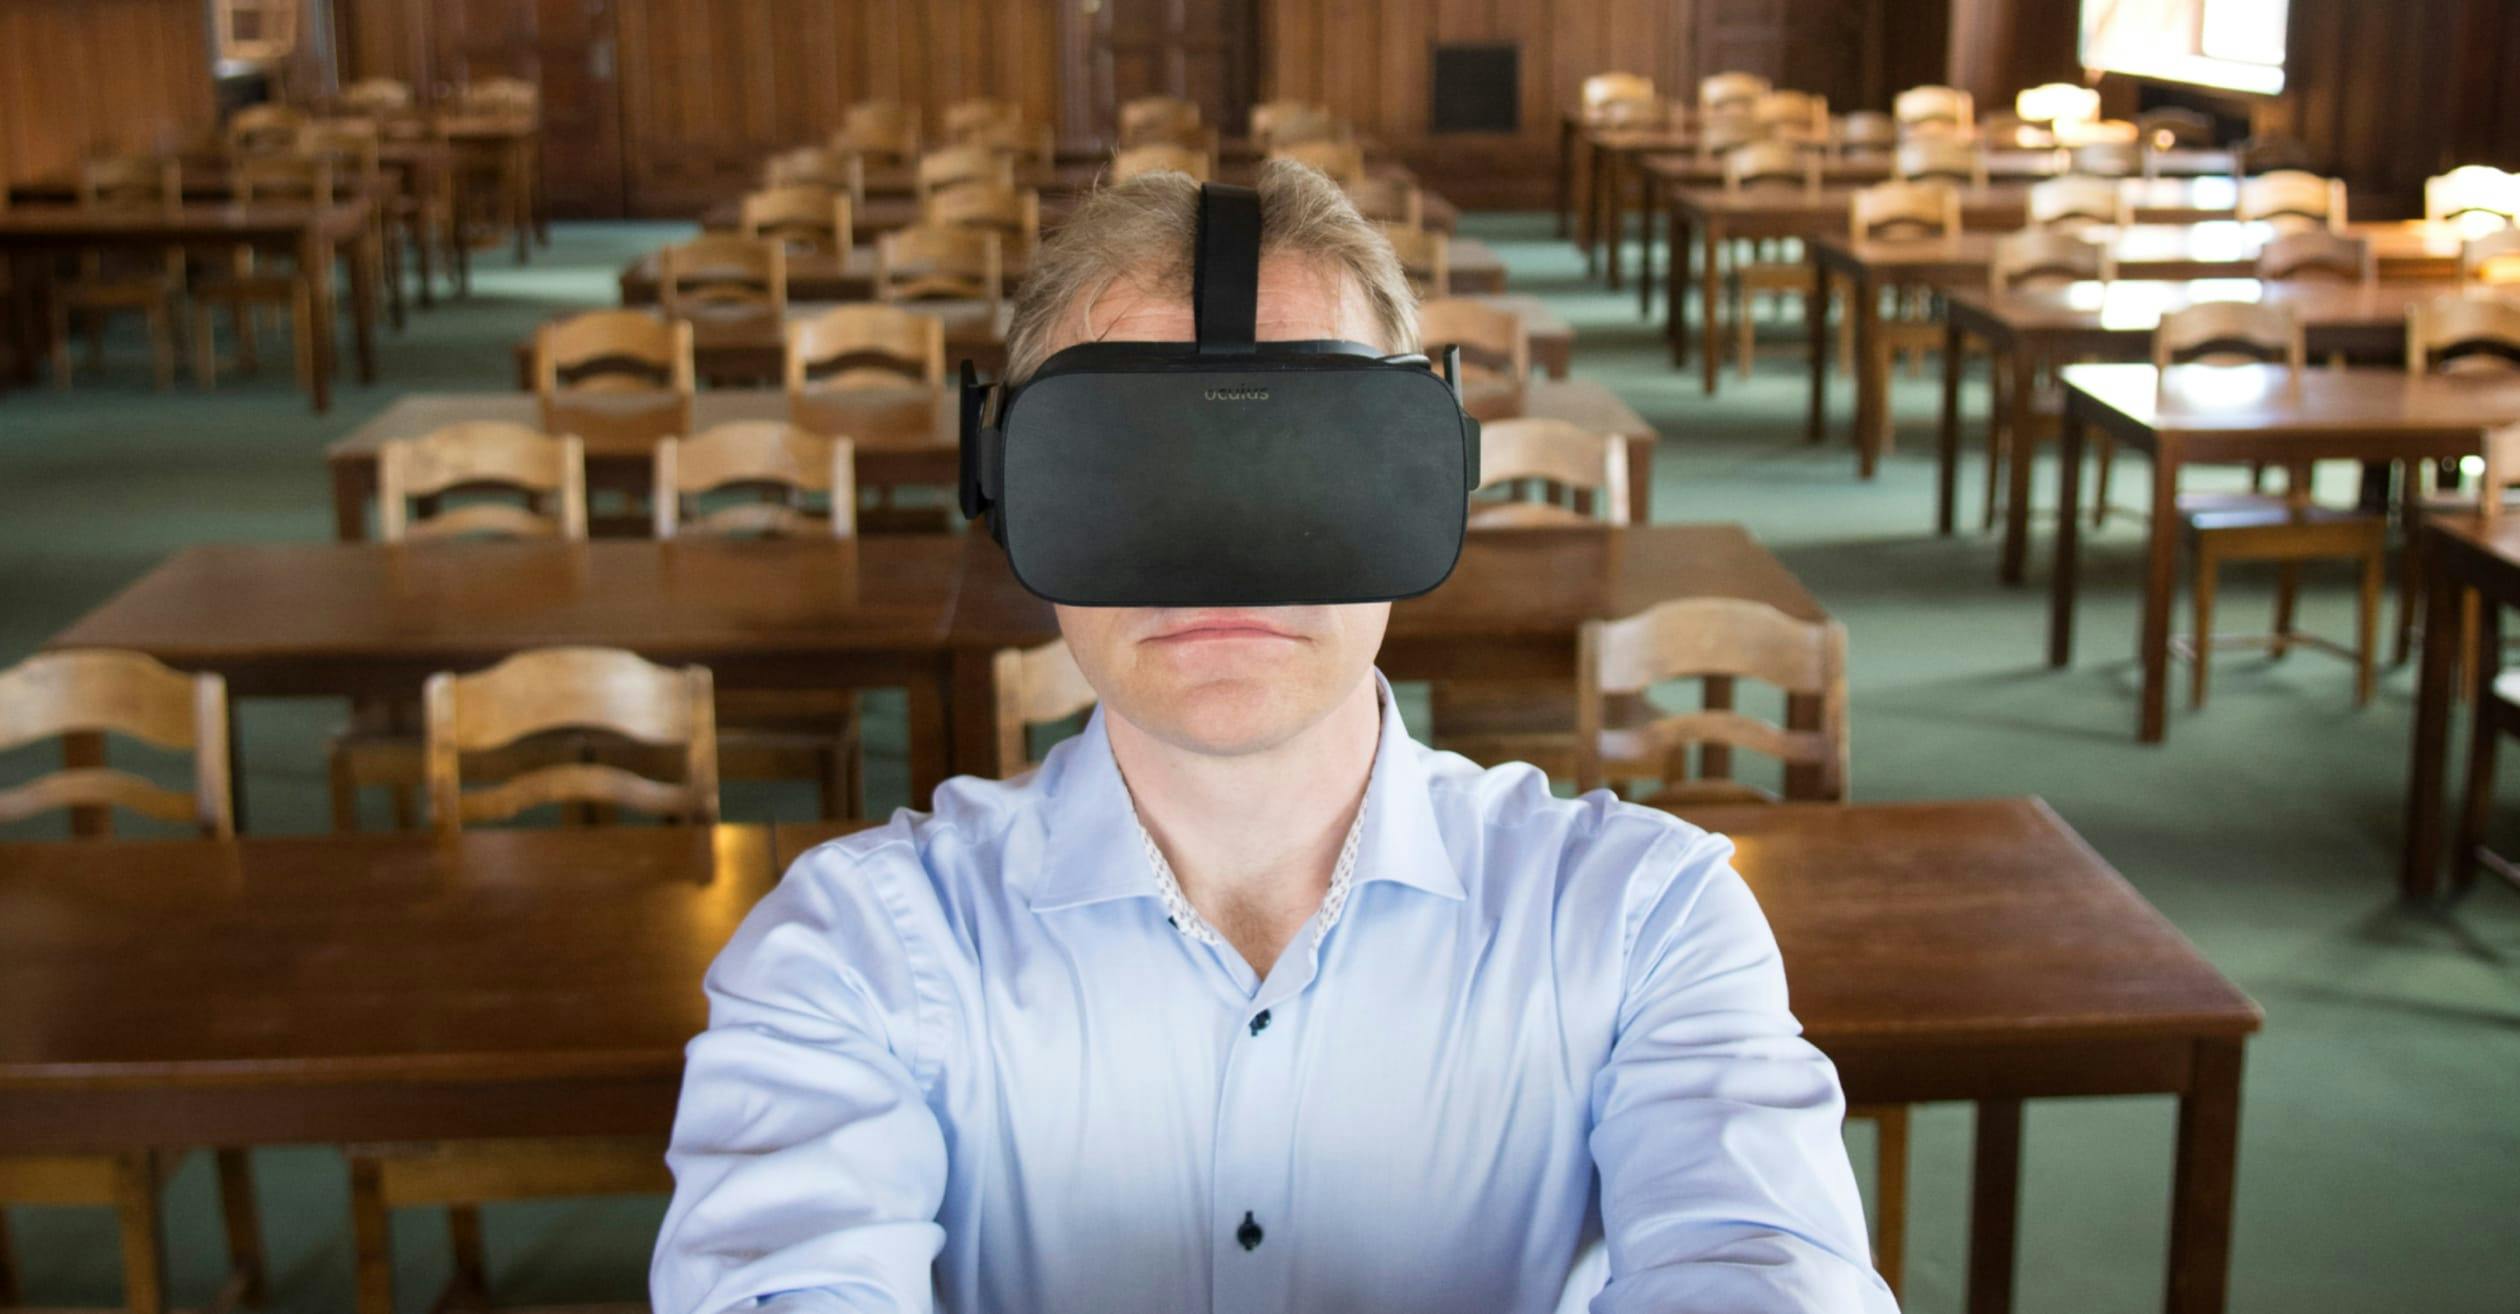 ASK Per Carlbring about Virtual Reality CBT for phobias